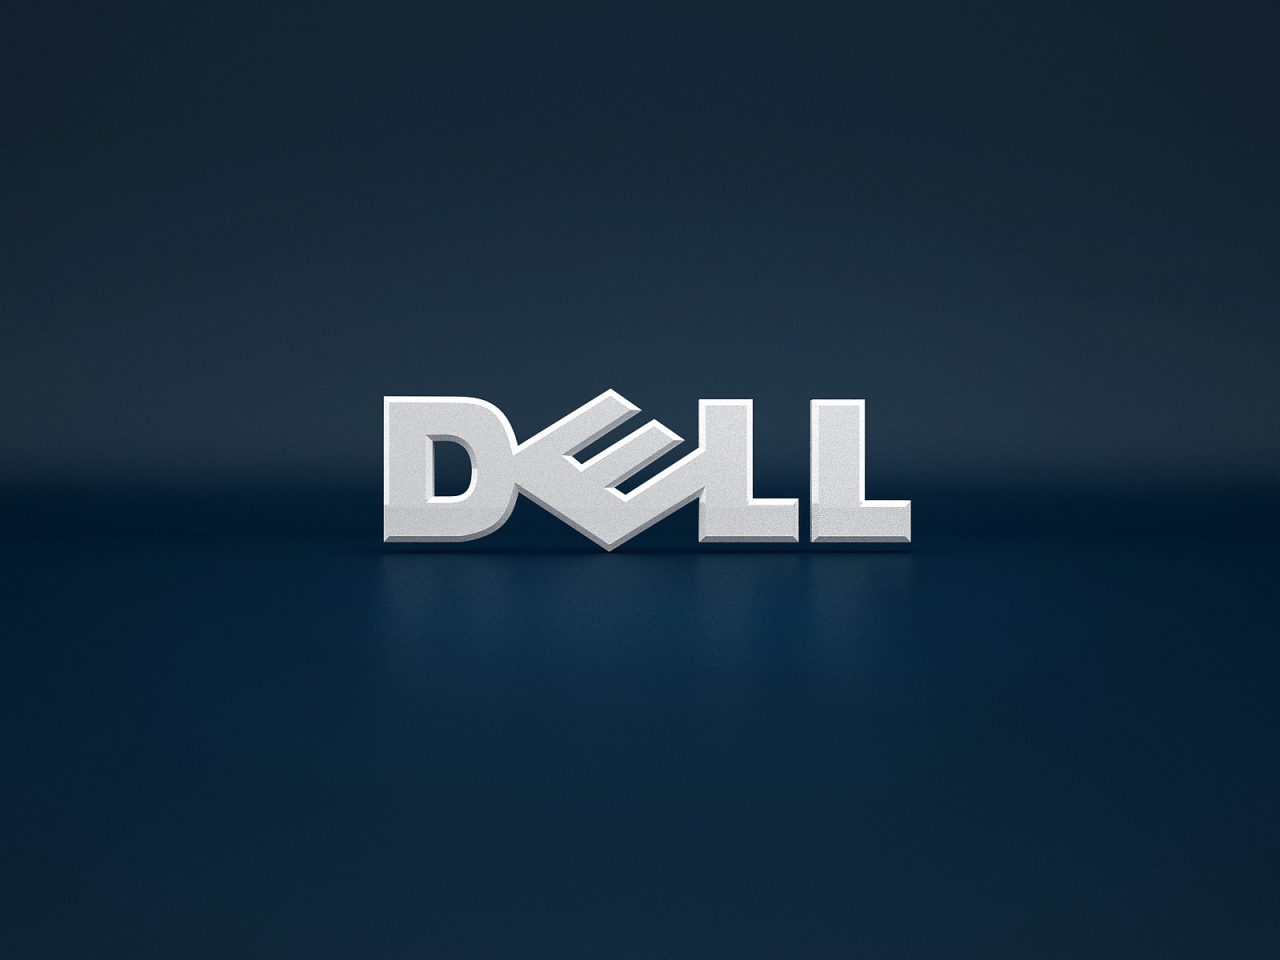 Dell blue background for 1280 x 960 resolution